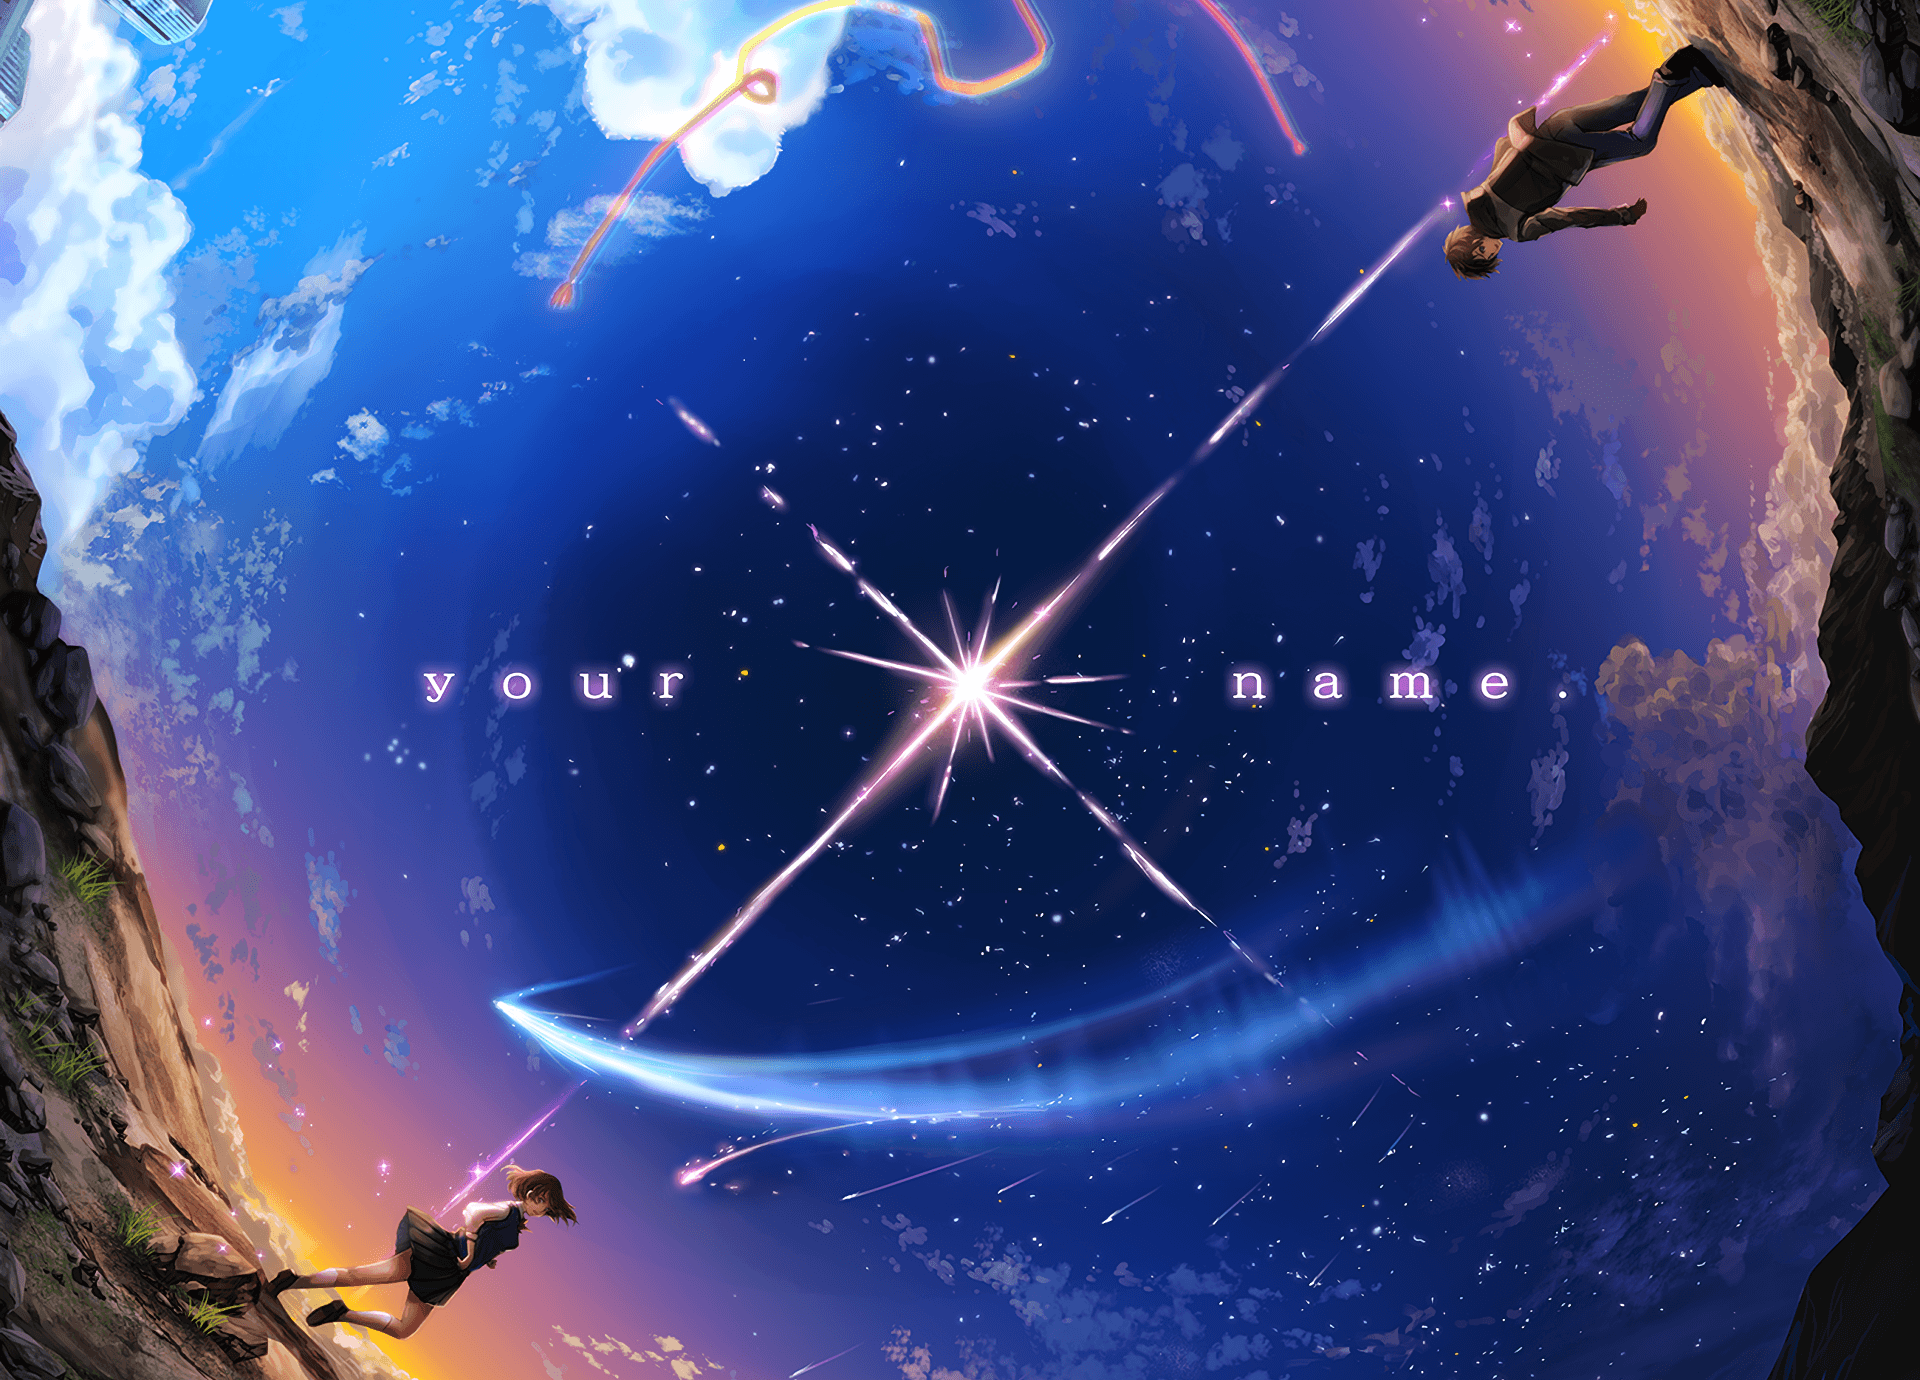 1383 Your Name. HD Wallpapers